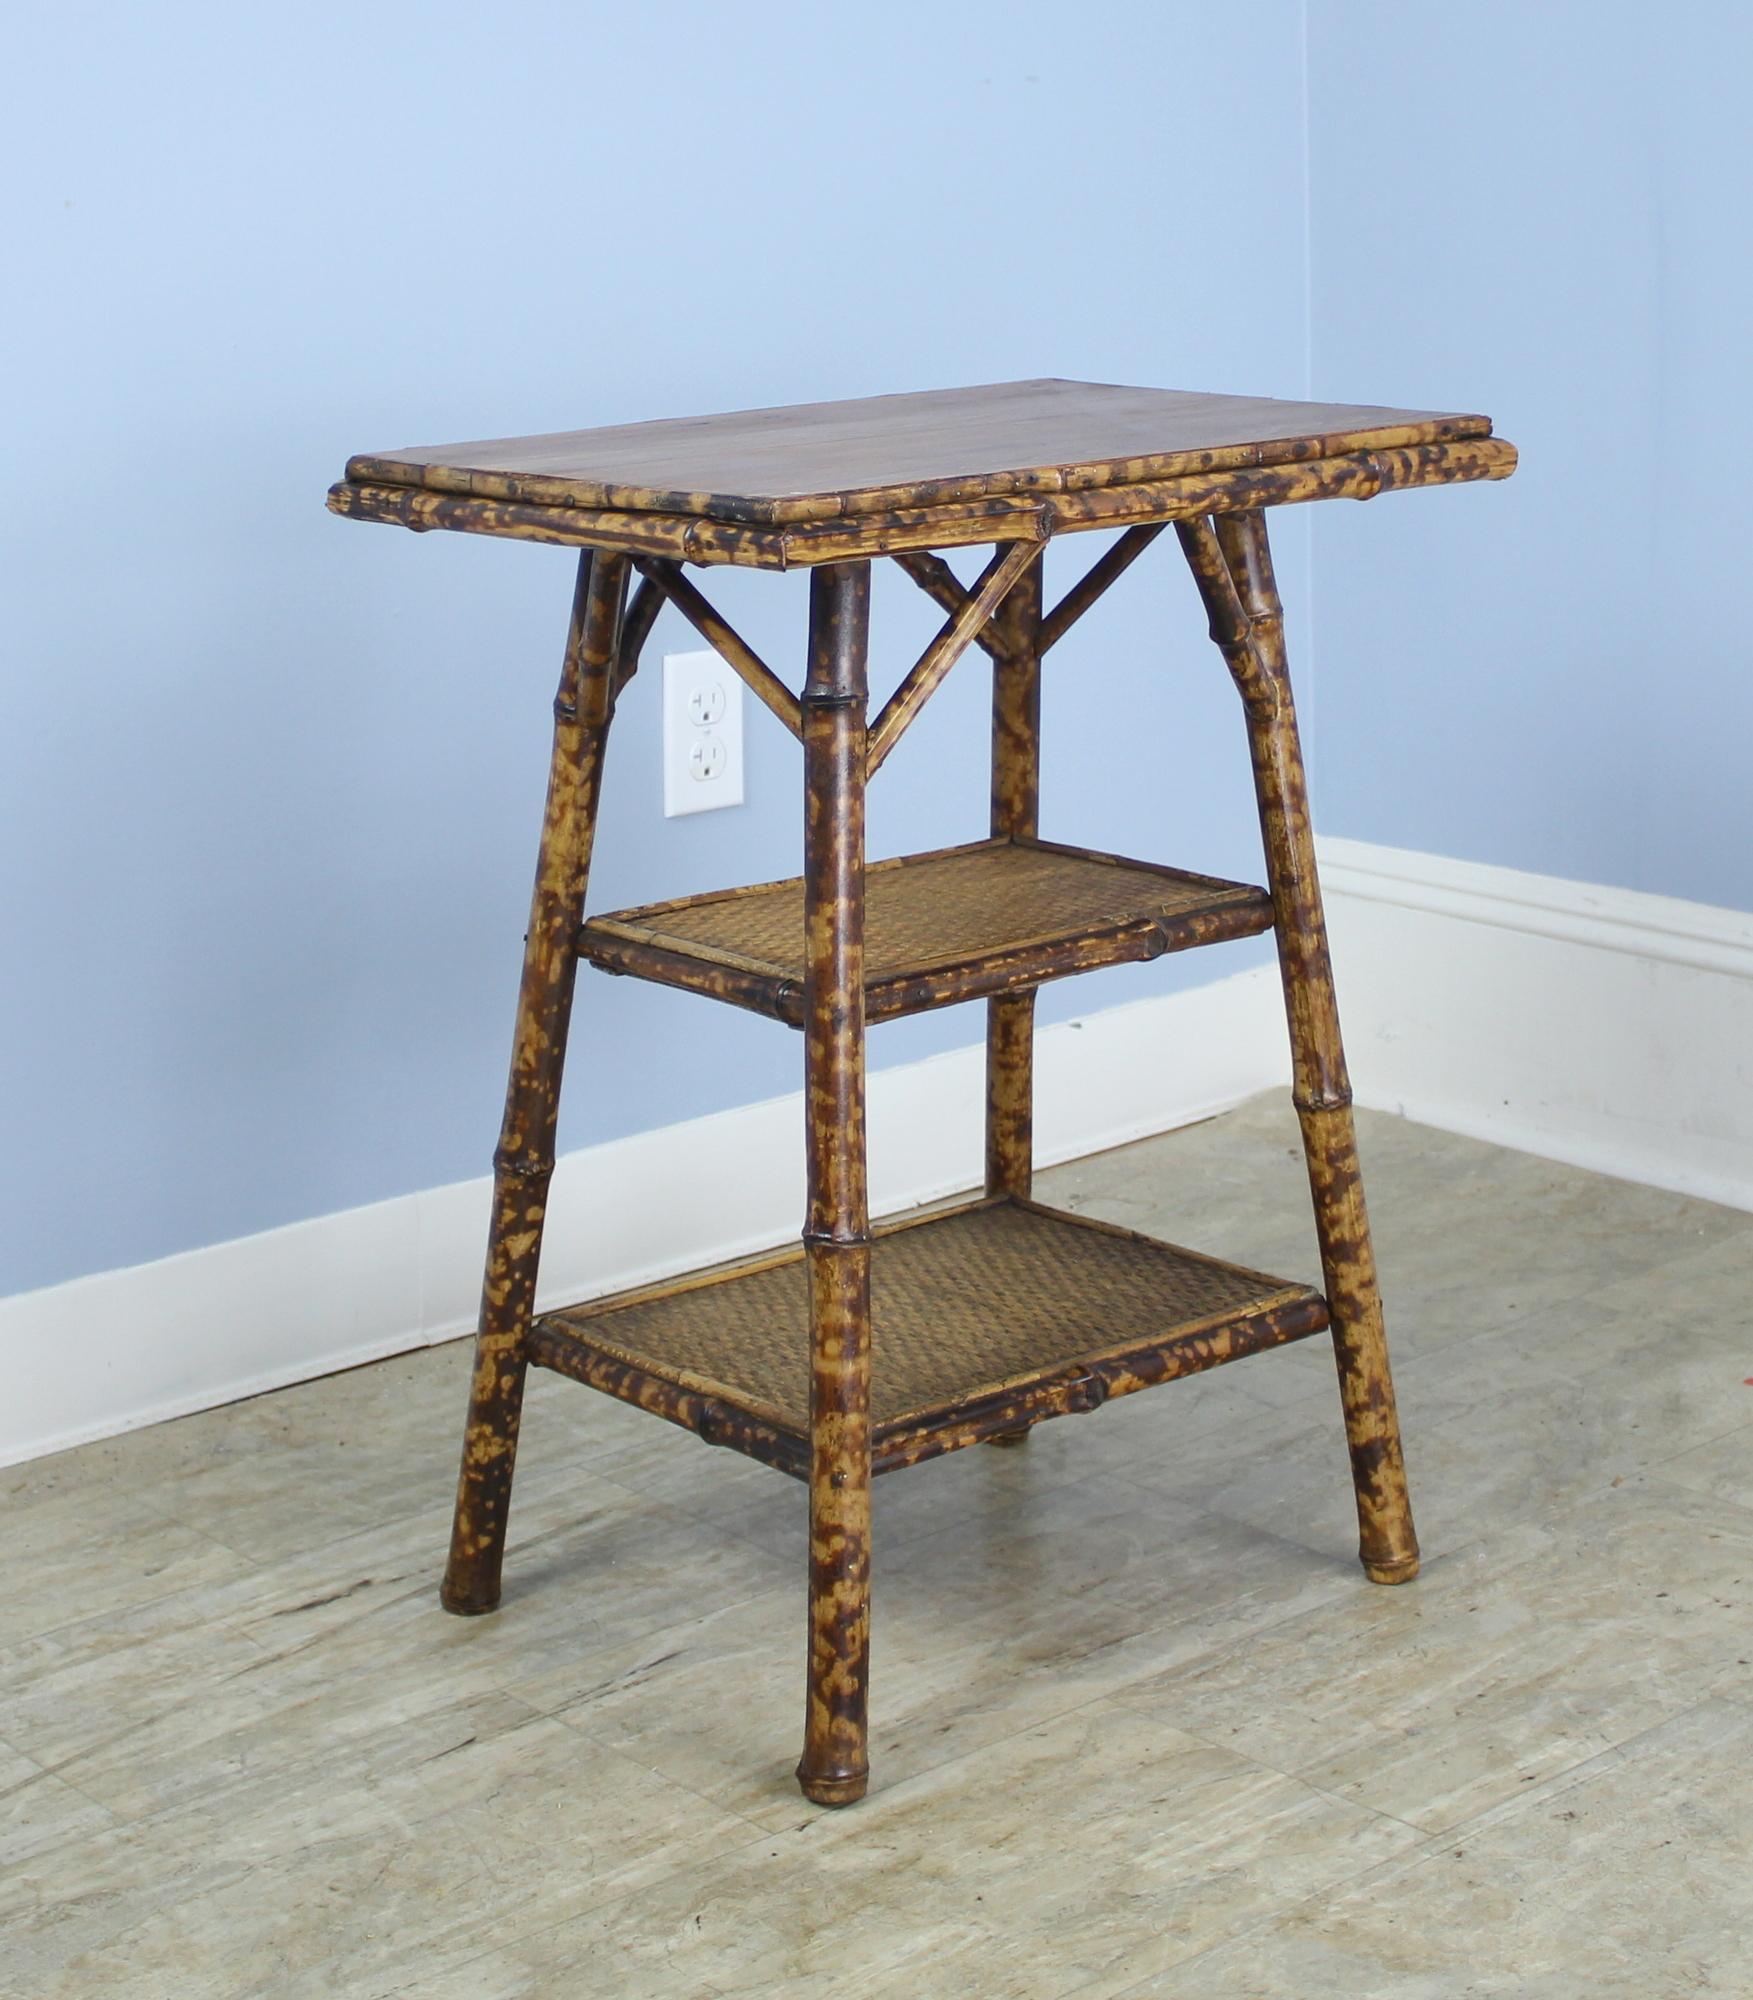 An antique English bamboo side table, with flared legs and with three shelves. The top is wood, with good color and patina, the bottom shelves made of tightly woven rush. The bamboo, vividly painted, is in good sturdy condition. Charming as an end